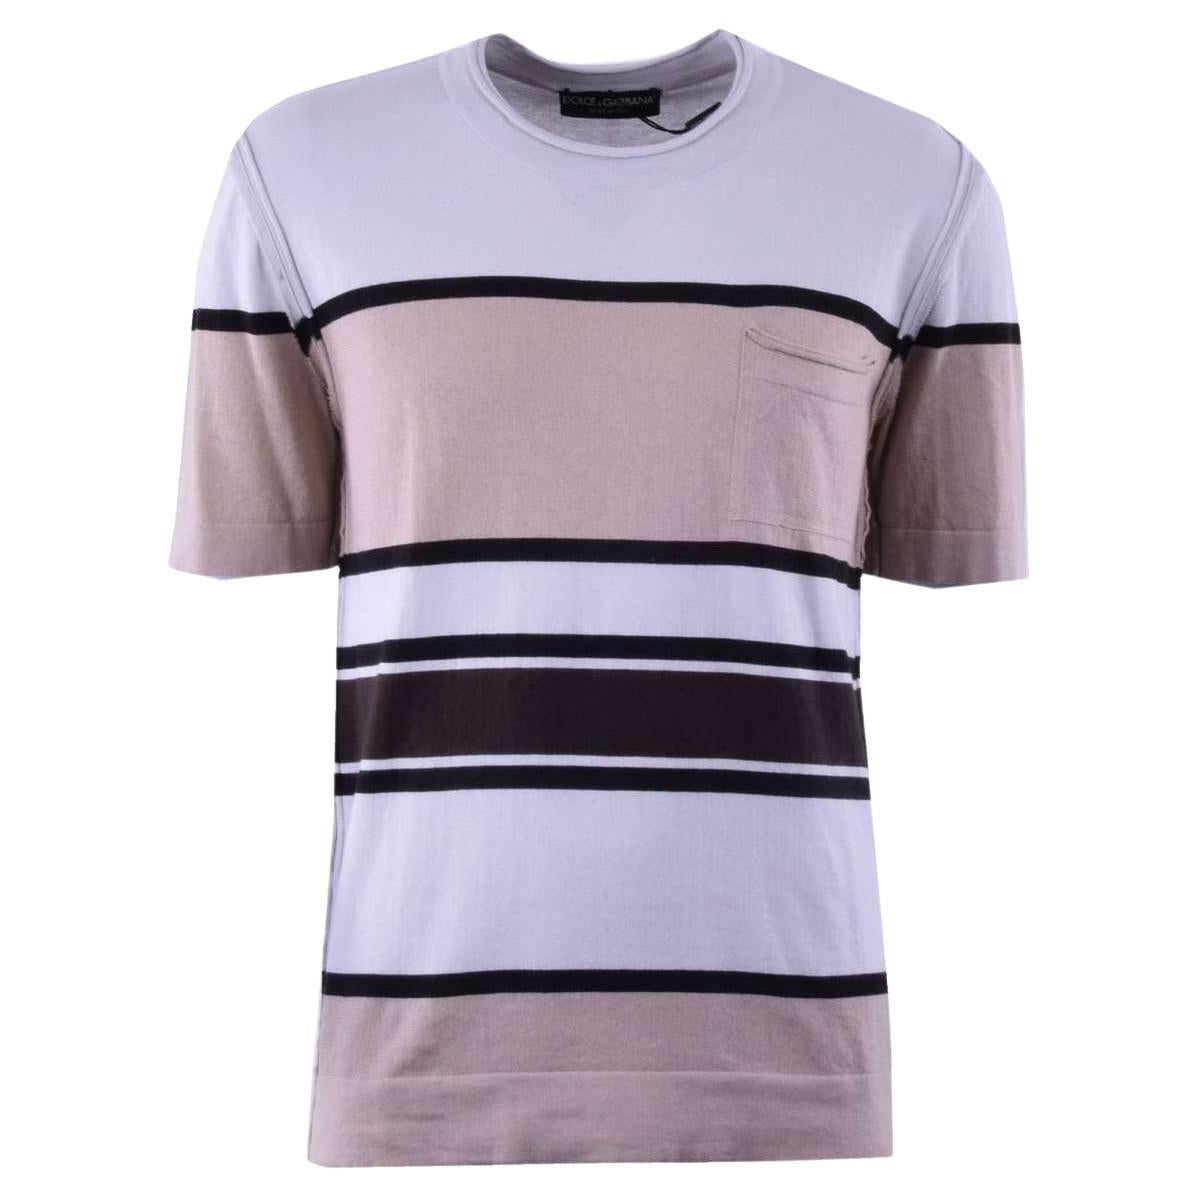 Dolce & Gabbana - Knitted Cotton Cashmere T-Shirt with Stripes Brown Beige 48 For Sale